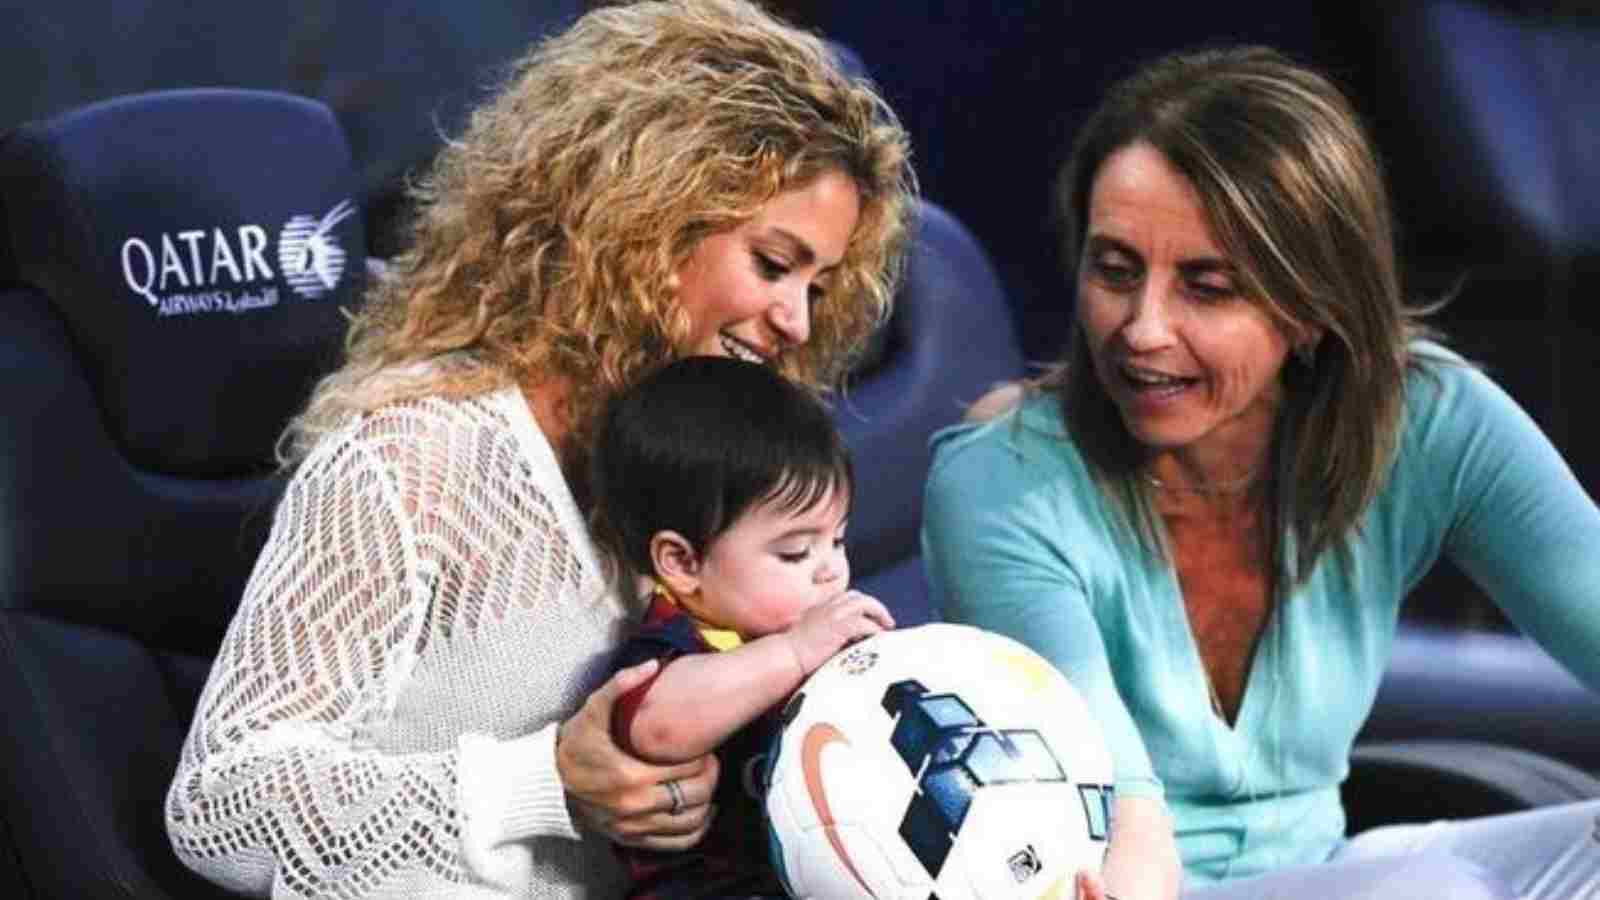 Pique's mother was devastated by his son's split from Shakira